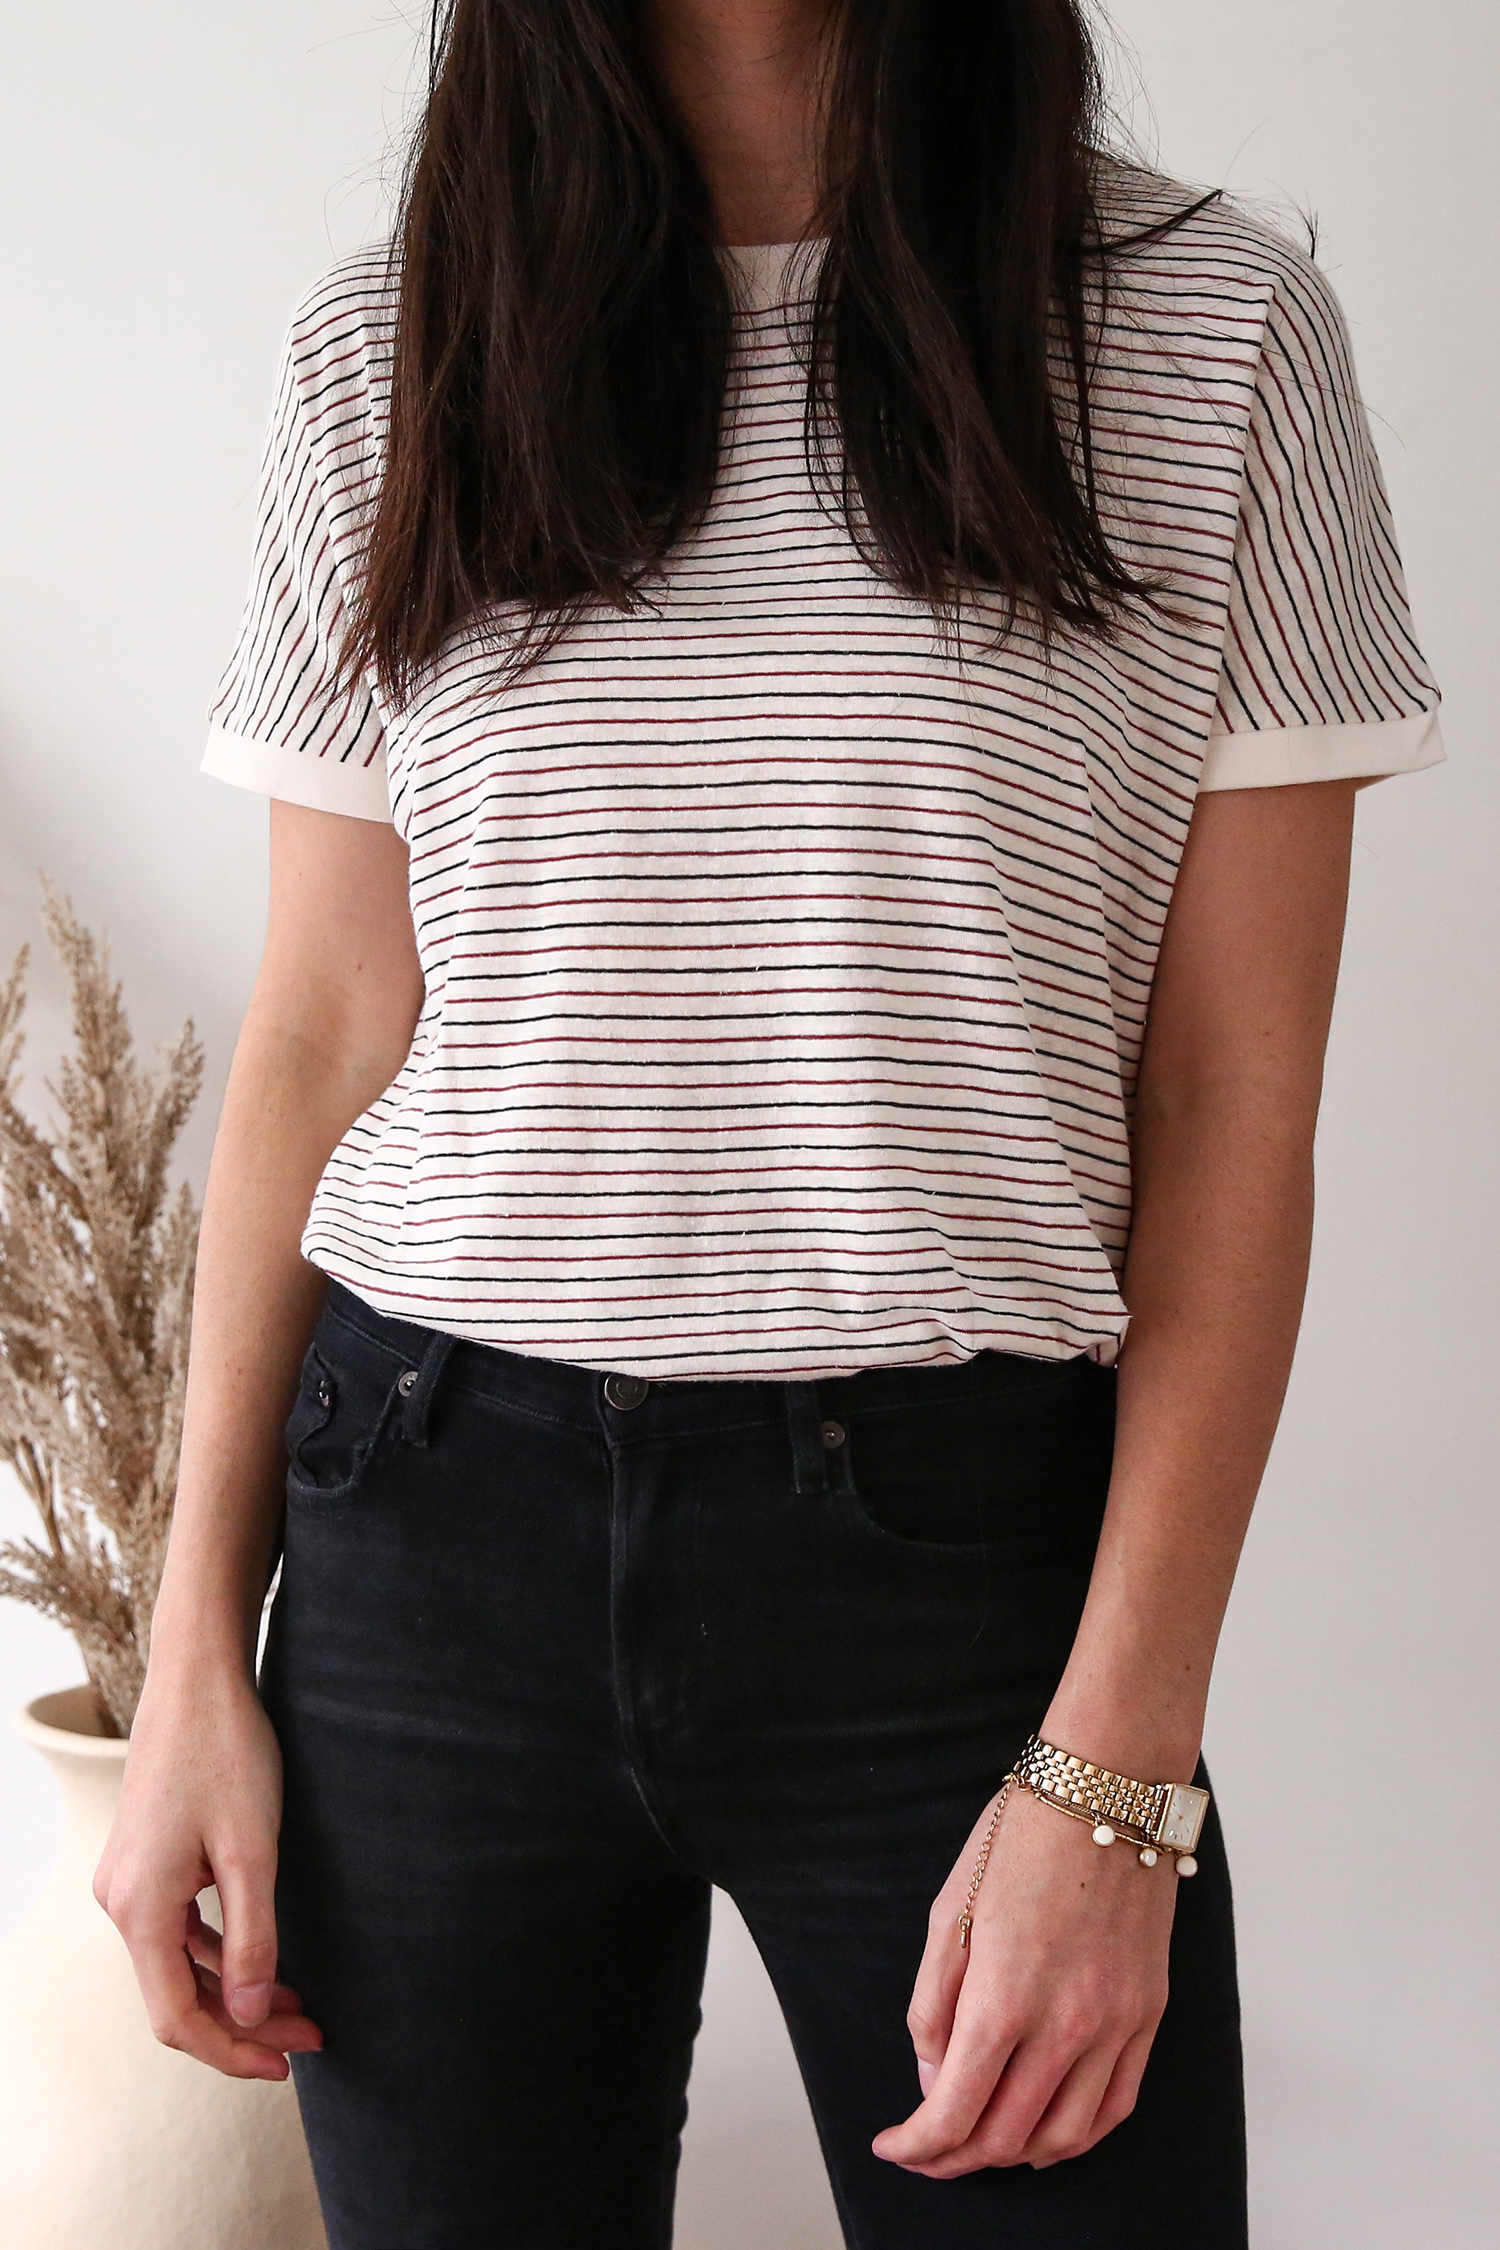 Madewell Hemp Relaxed Drapey Tee Review